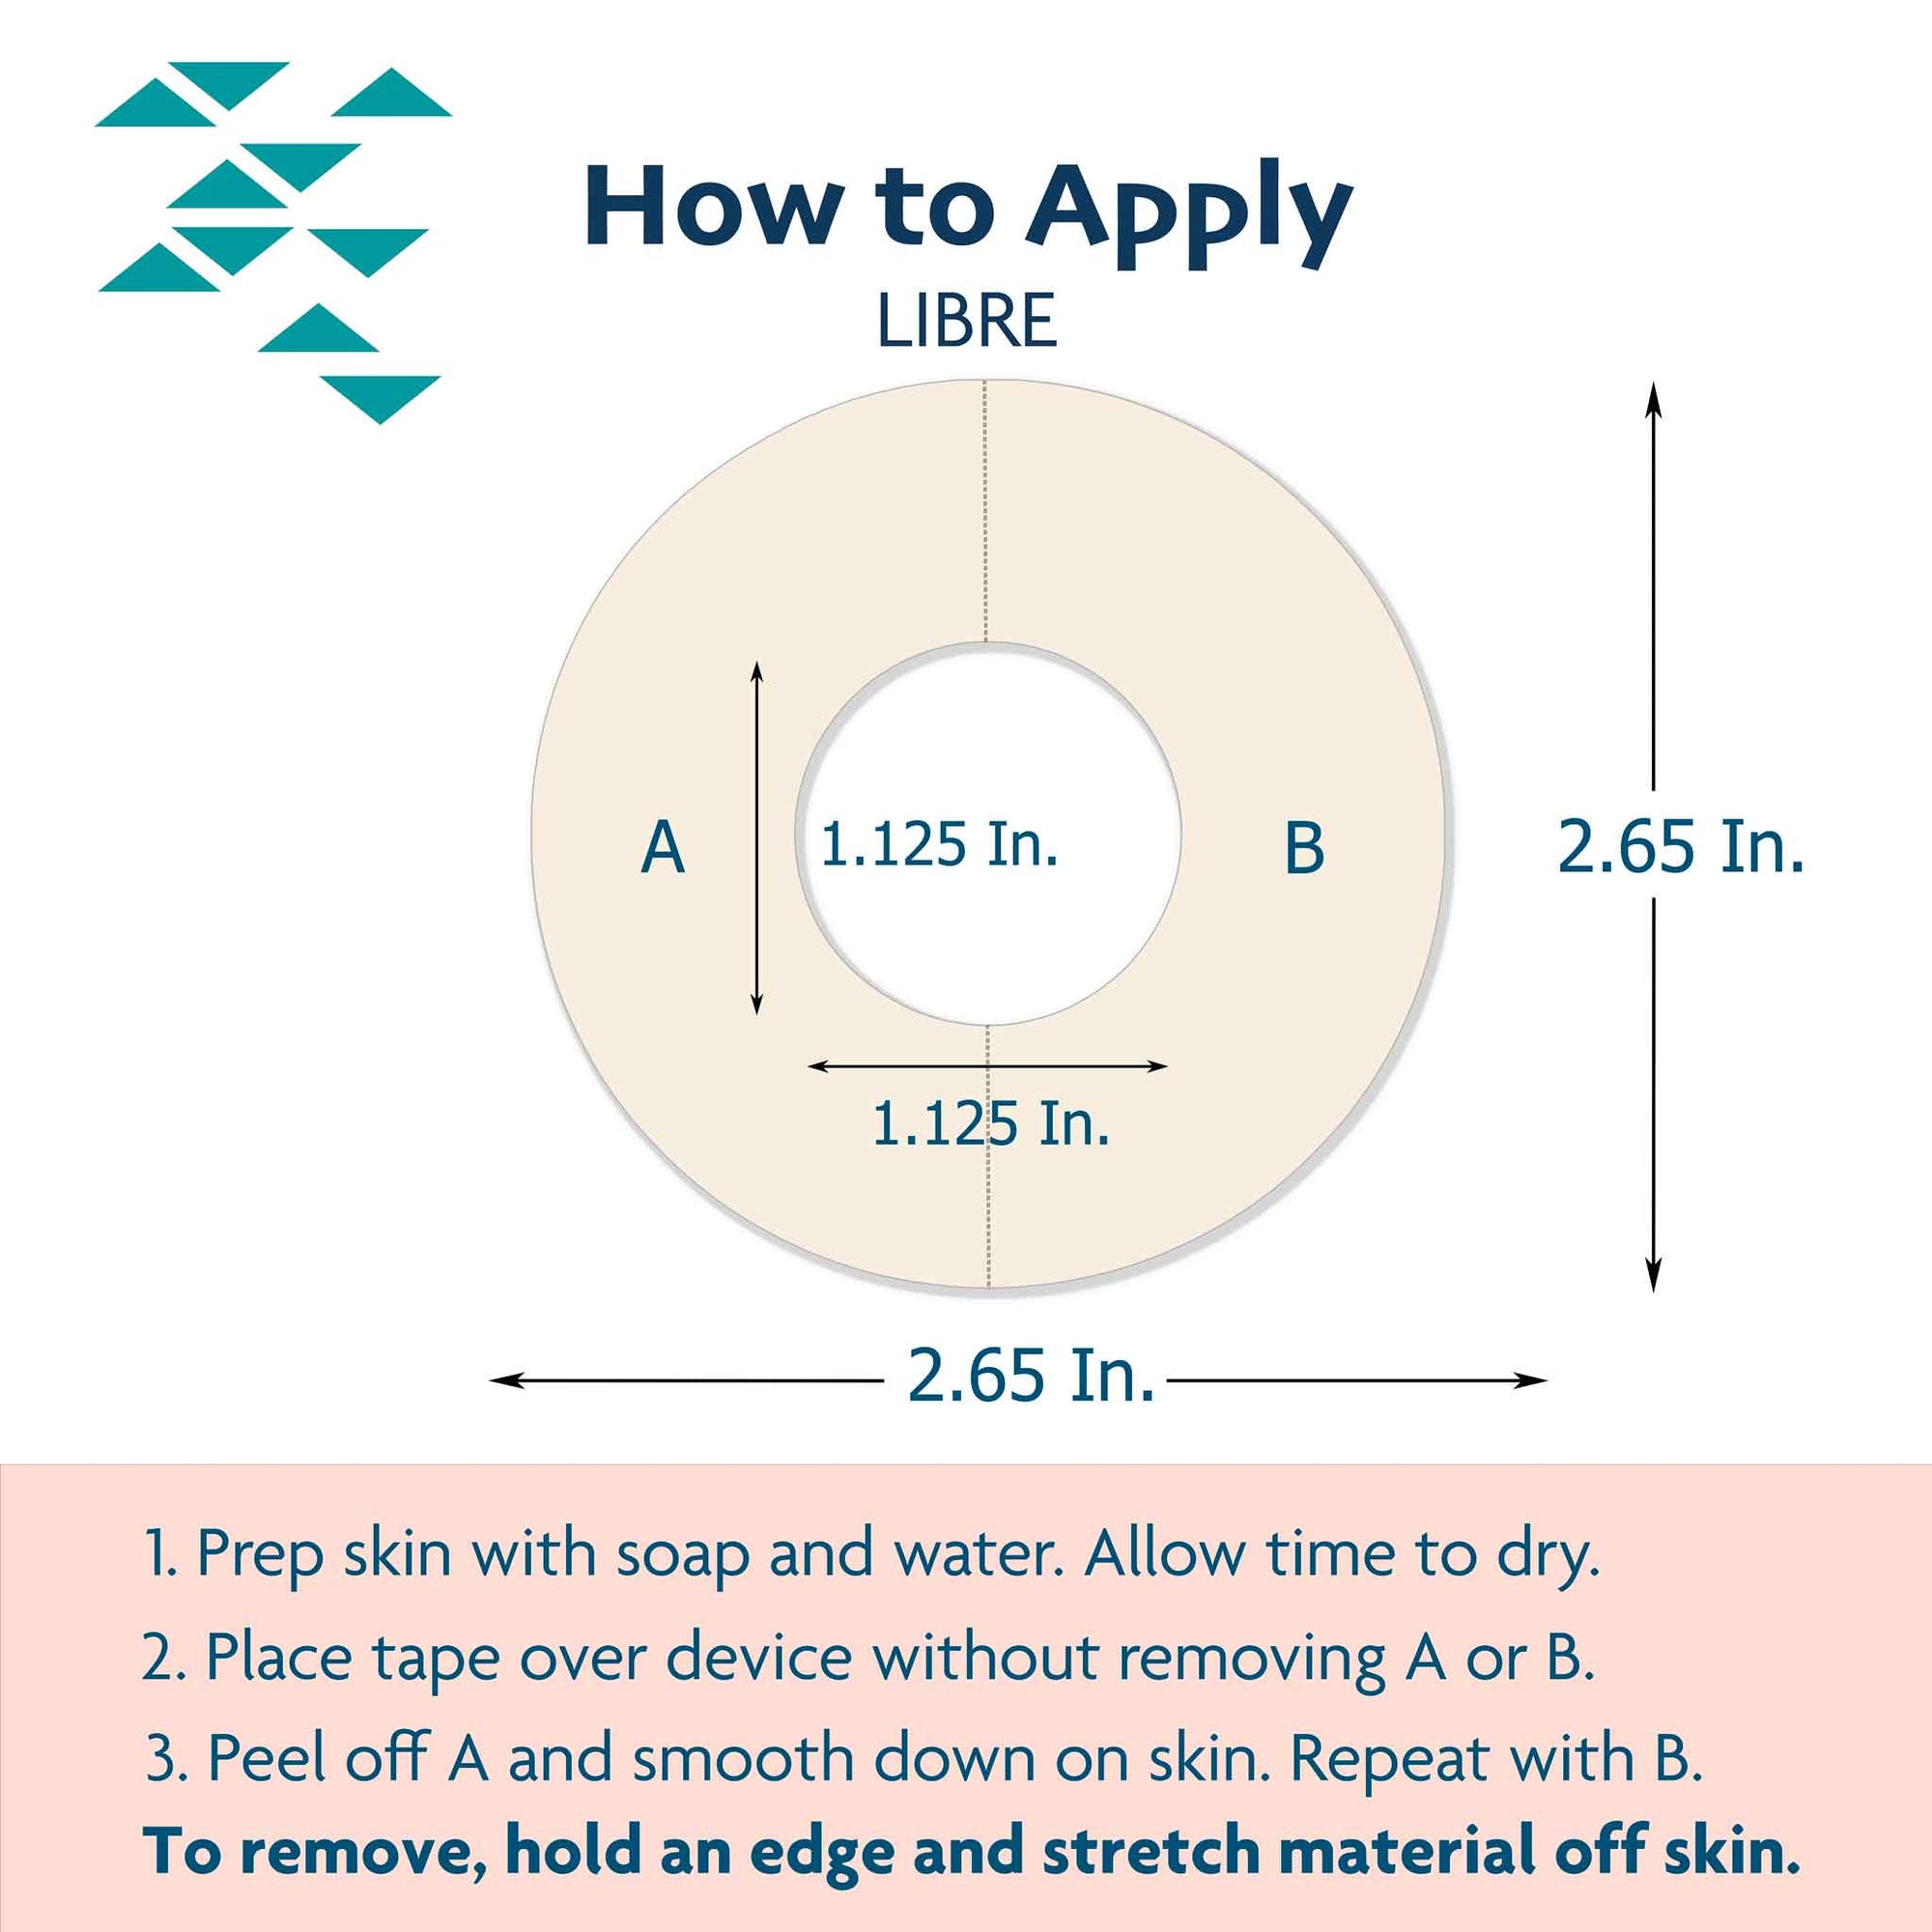 Freestyle Libre application tutorial step by step to properly secure your CGM, Abbott Lingo